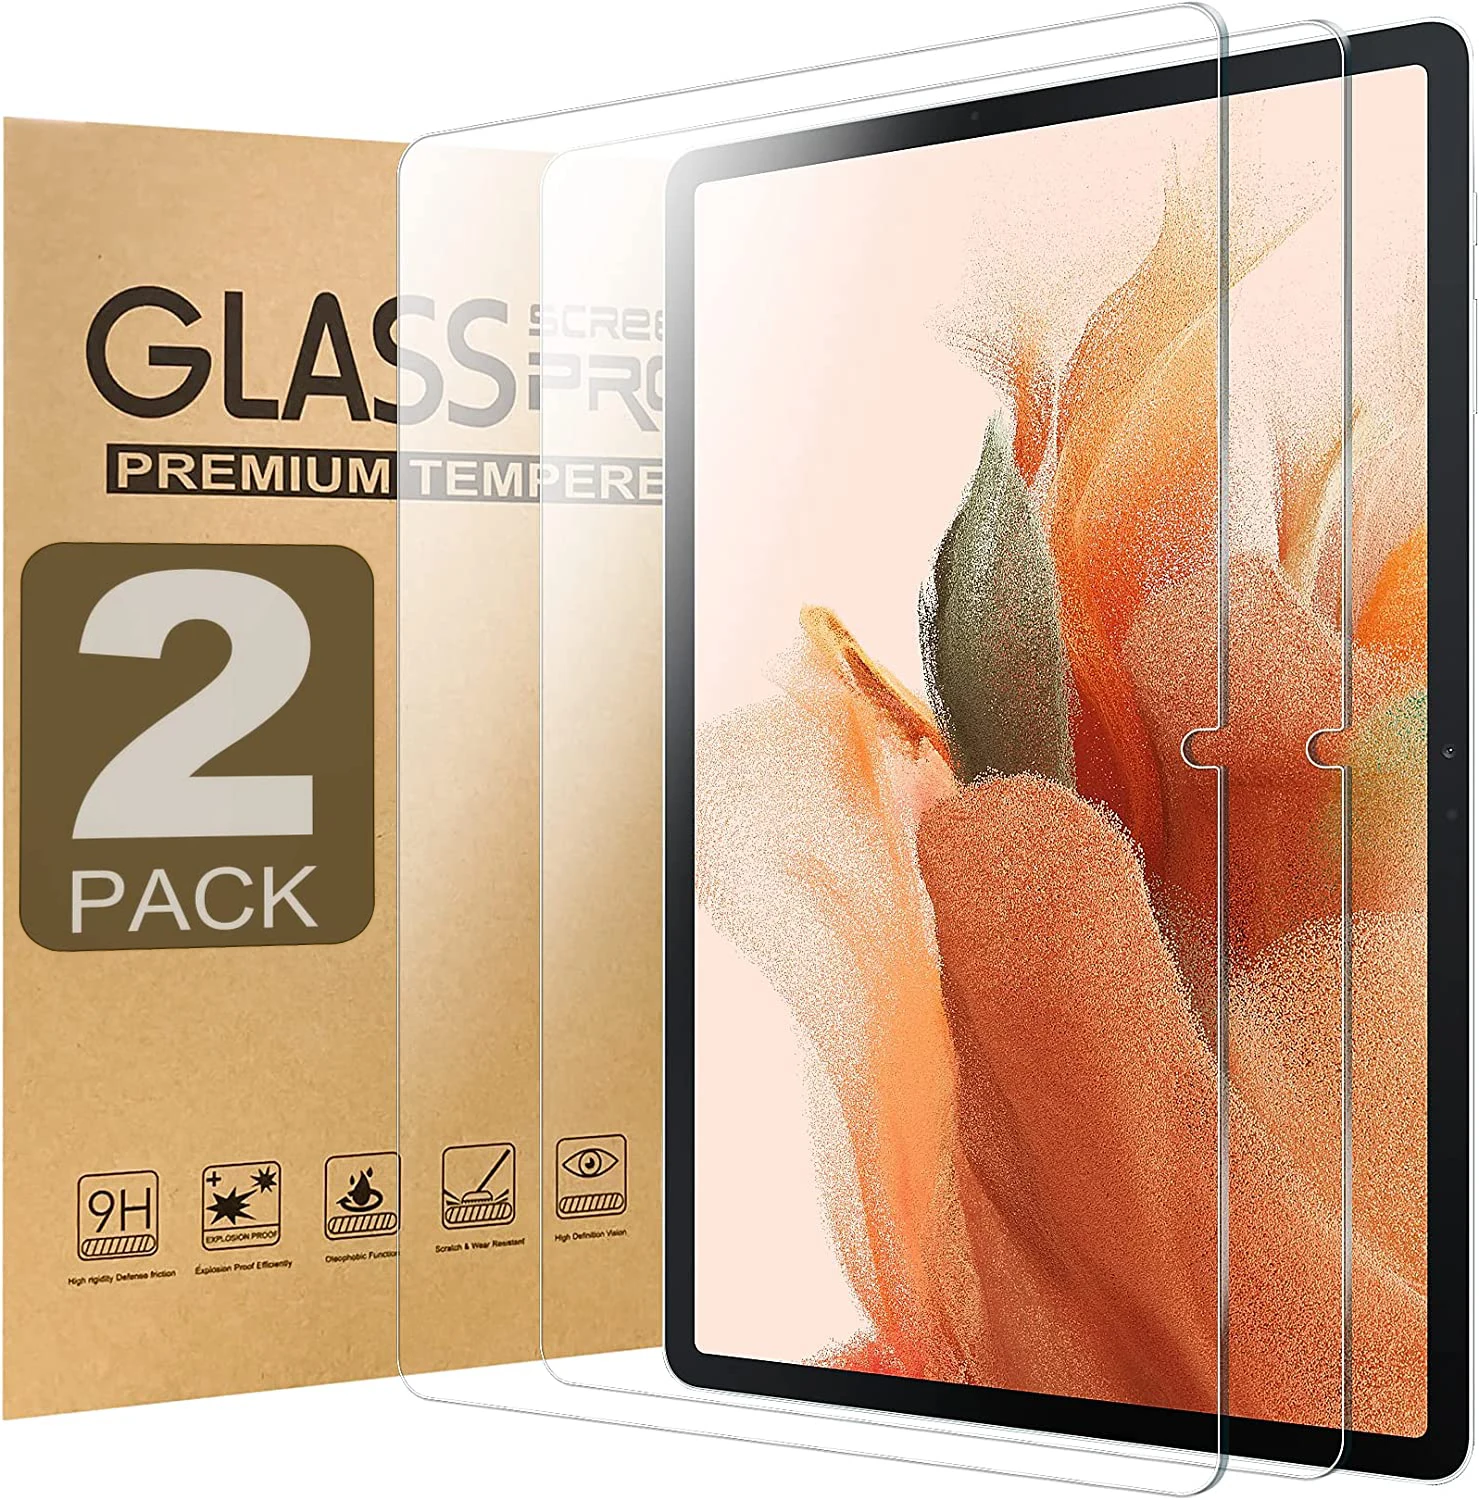 2pcs Screen Protector Tempered Glass For Samsung Galaxy S7 FE 12.4'' 2021 s7 fe SM-T730 SM-T735 SM-T736B HD Clear Tablet Film 9h tempered glass for samsung tab s7 fe lite 2021 12 4 inch tablet screen protector flim for samsung sm t730 sm t736b t735 t736